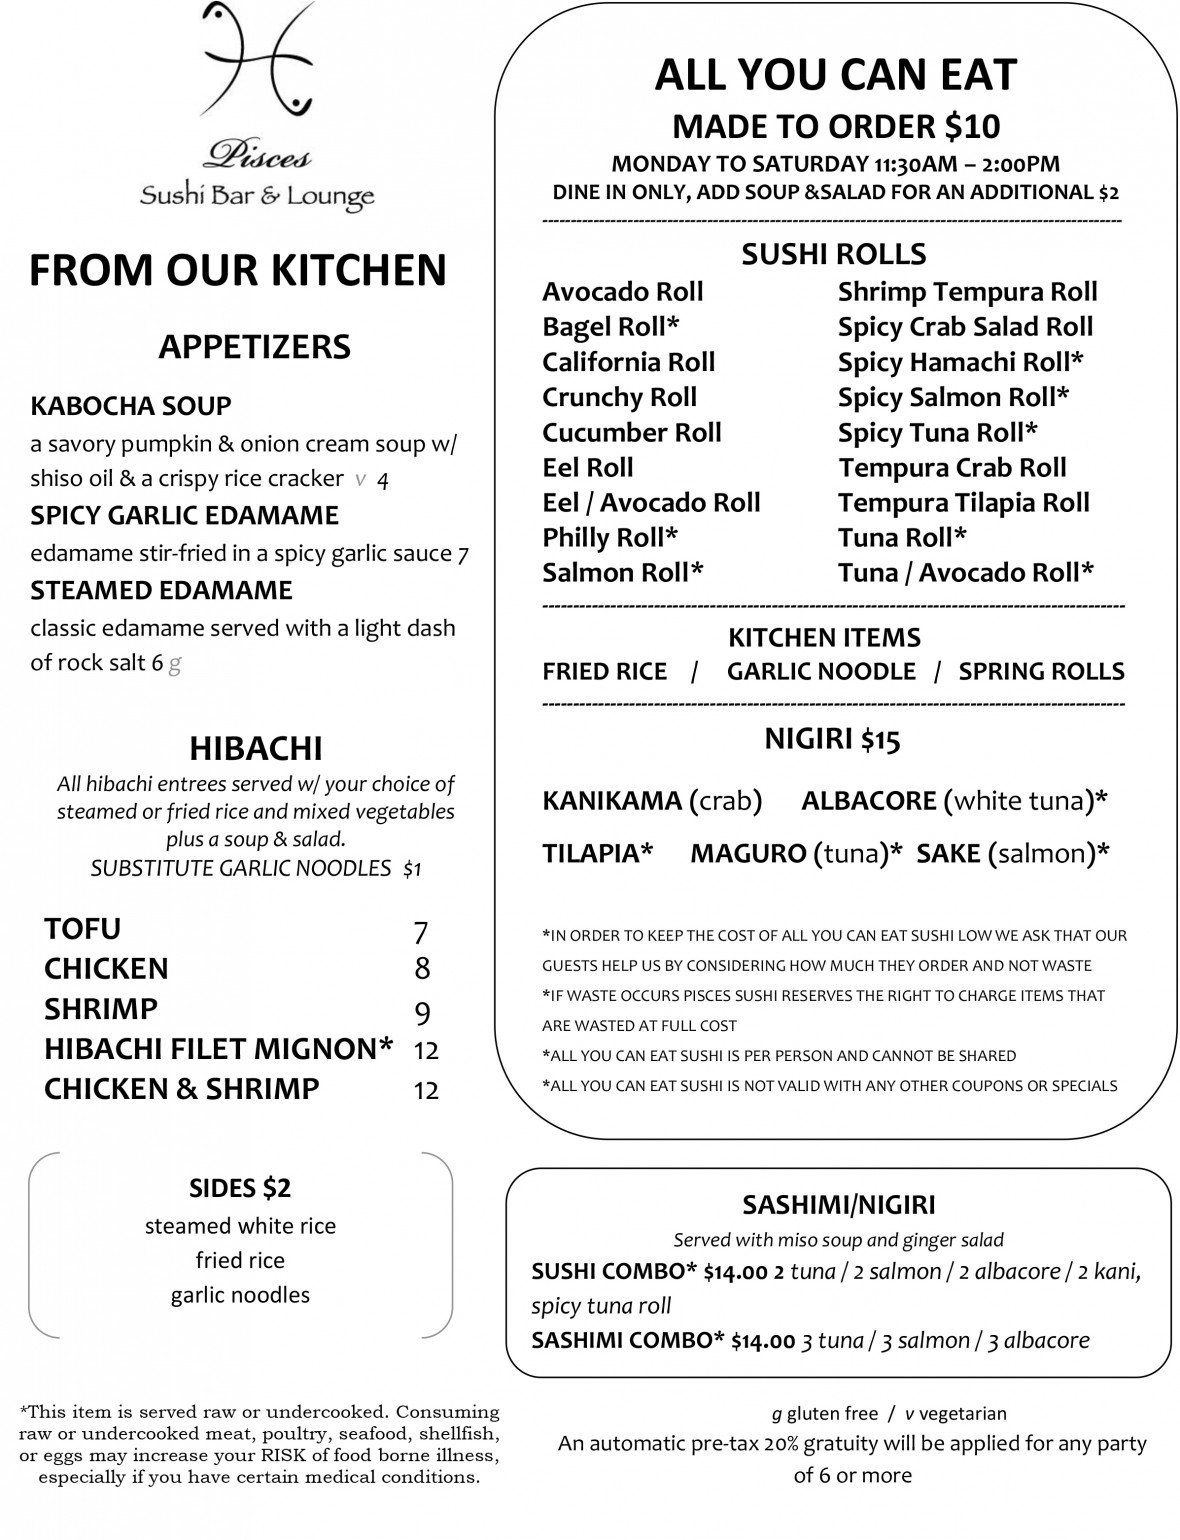 New Lunch 2014 all you can eat REVISED (3)